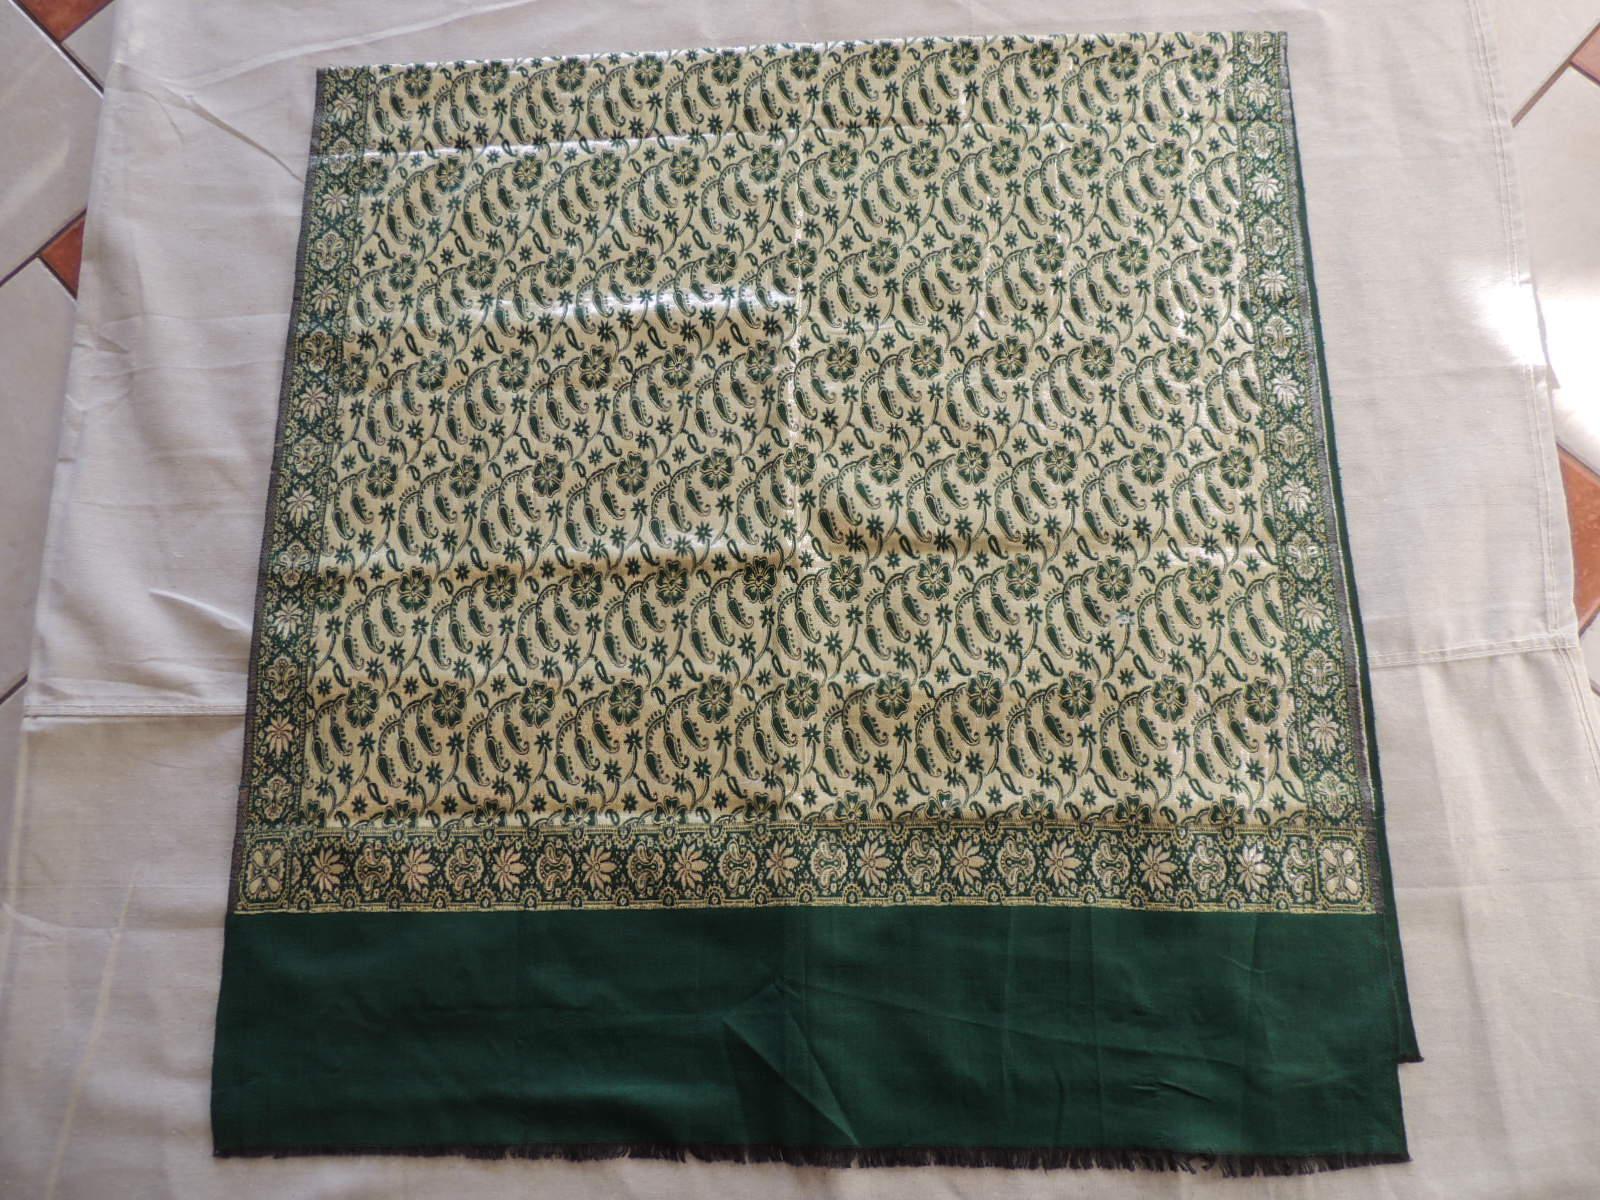 Hand-Crafted Vintage Emerald Green and Gold Indian Woven Paisley Shawl